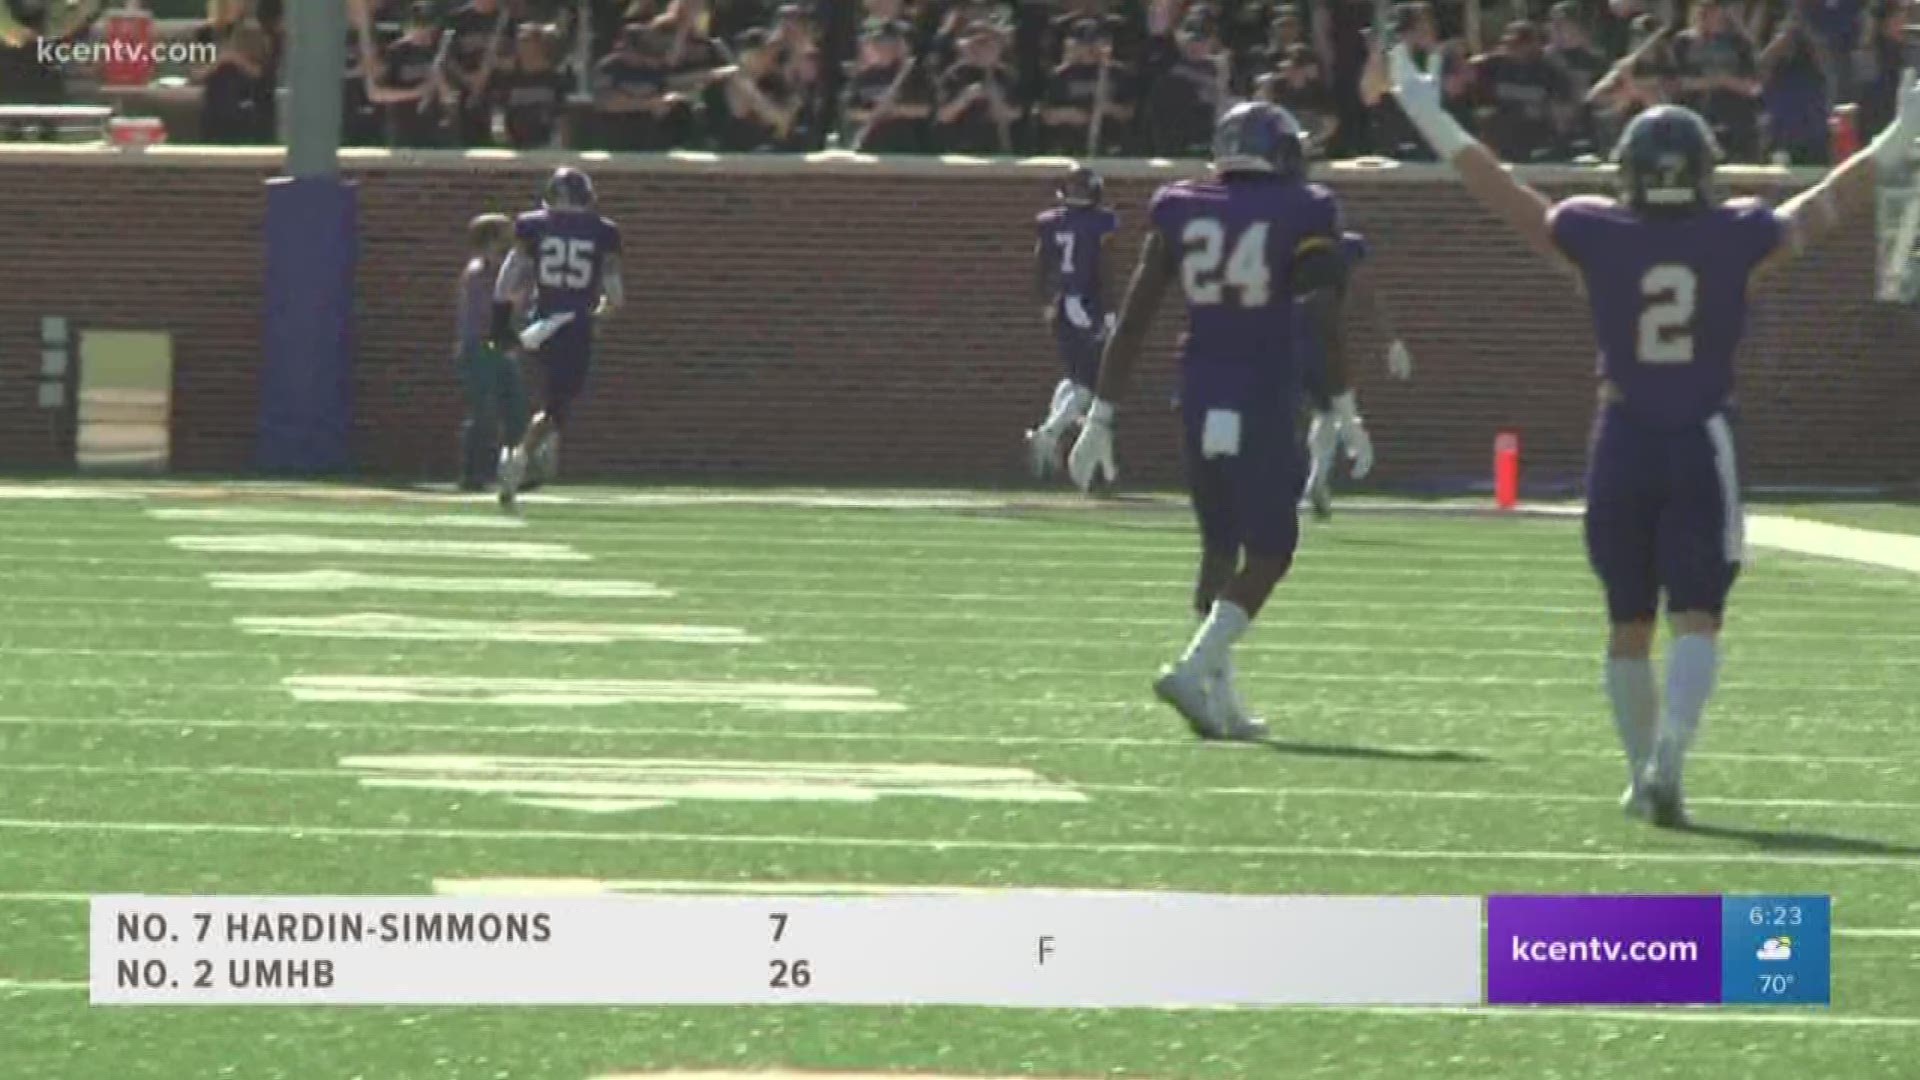 UMHB rolled 26-7 against Hardin-Simmons in its 15th straight first-round win.